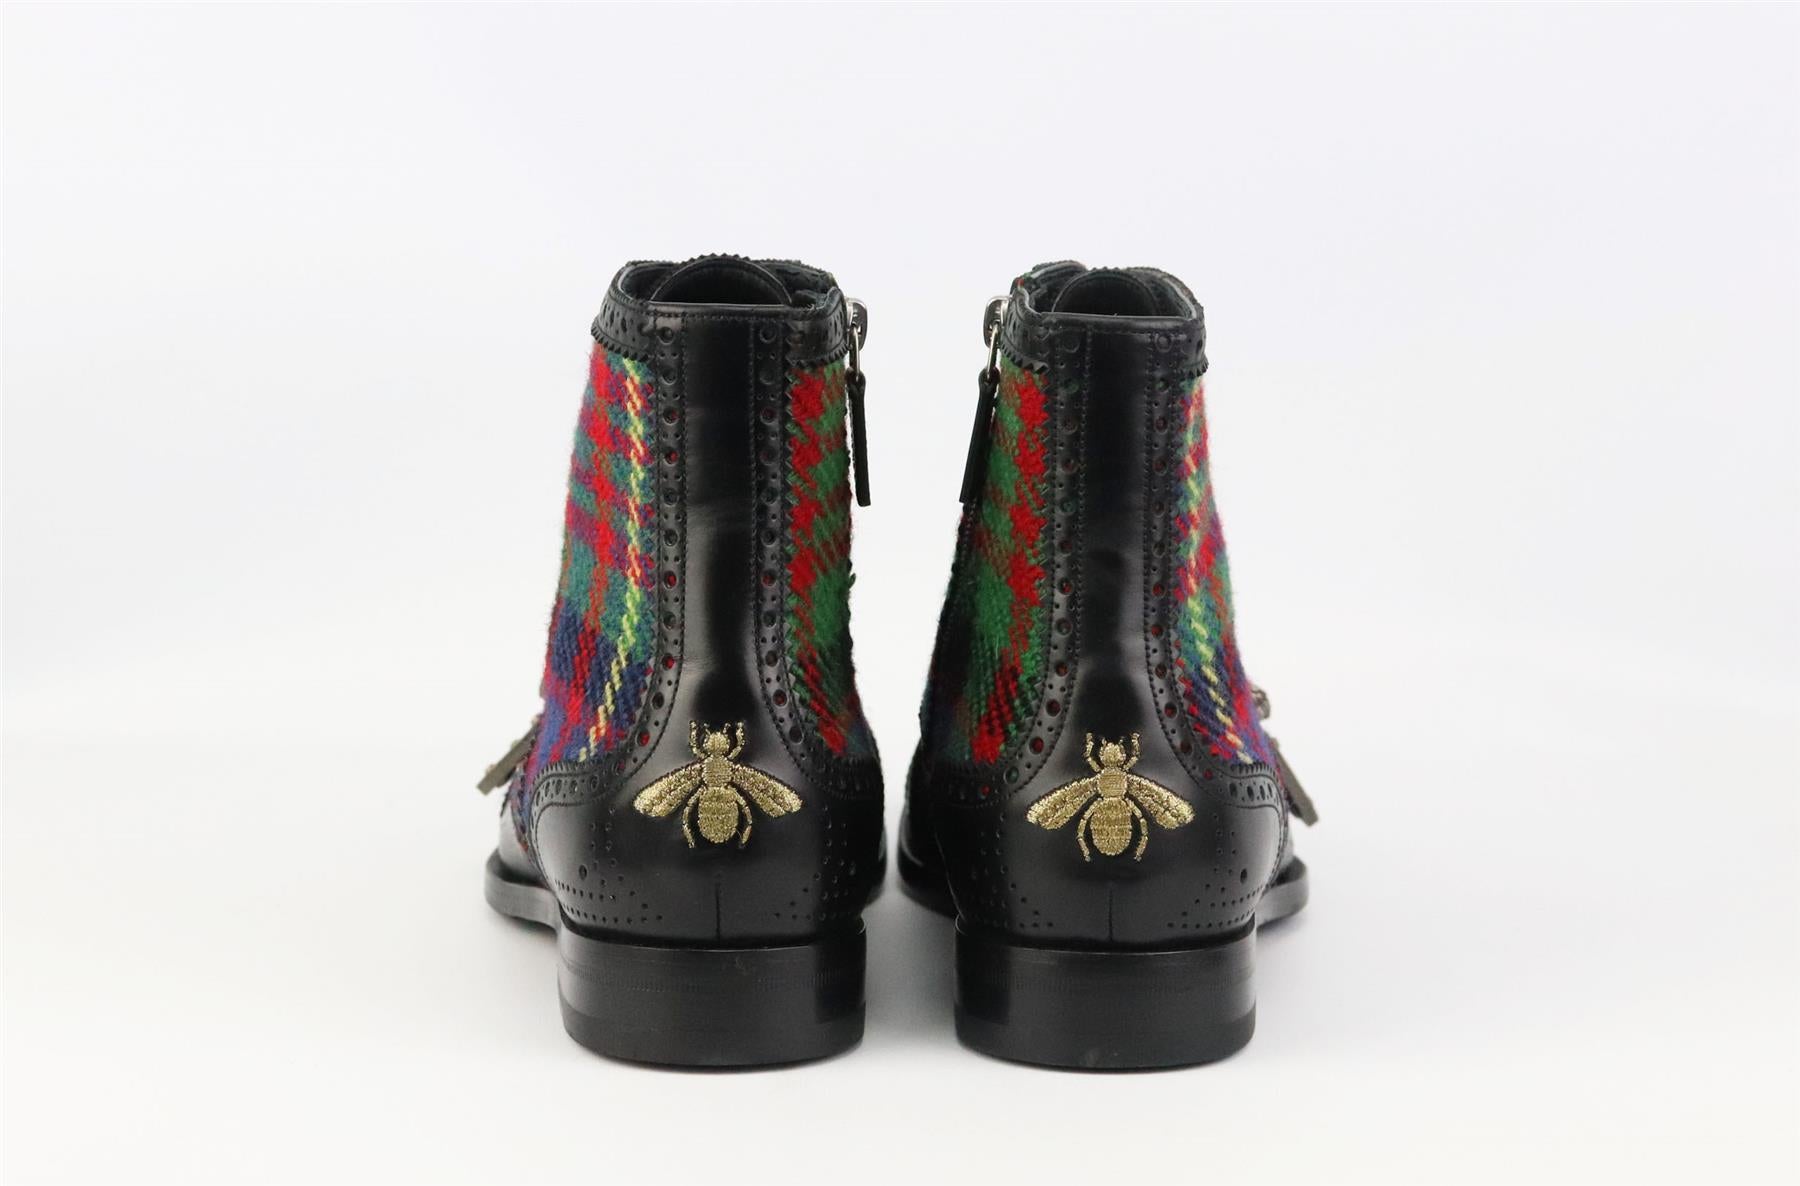 These combat-style 'Queercore' ankle boots by Gucci are made in Italy from smooth leather and tartan, they're detailed with traditional brogue-inspired pinking and perforations, and topped with the label's signature 'Dionysus' buckles. Sole measures